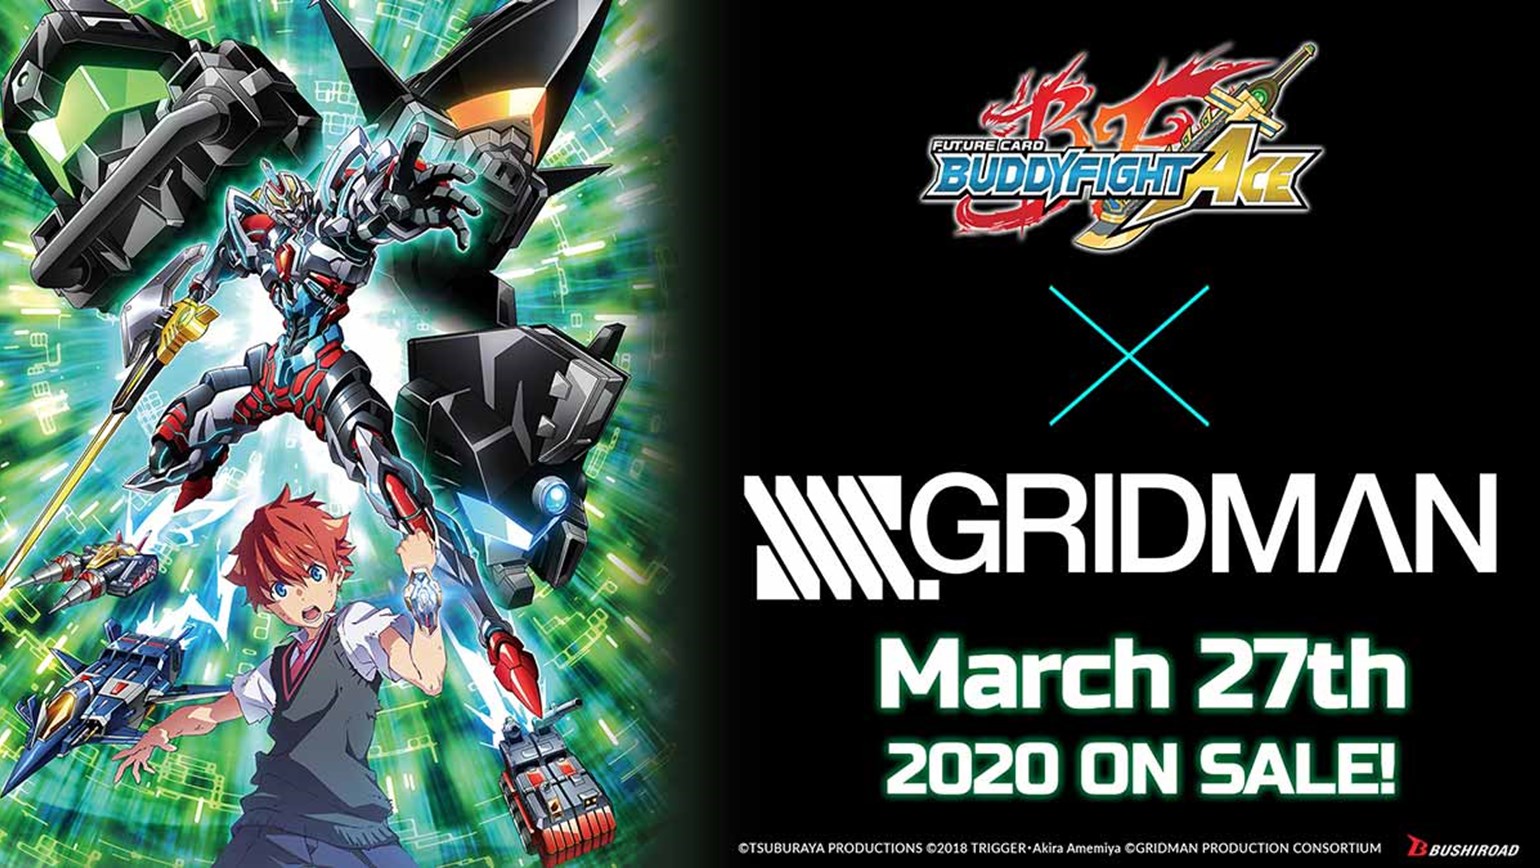 Future Card Buddyfight Ace Ultimate Booster Cross Vol. 5 SSSS.GRIDMAN Coming March 27th